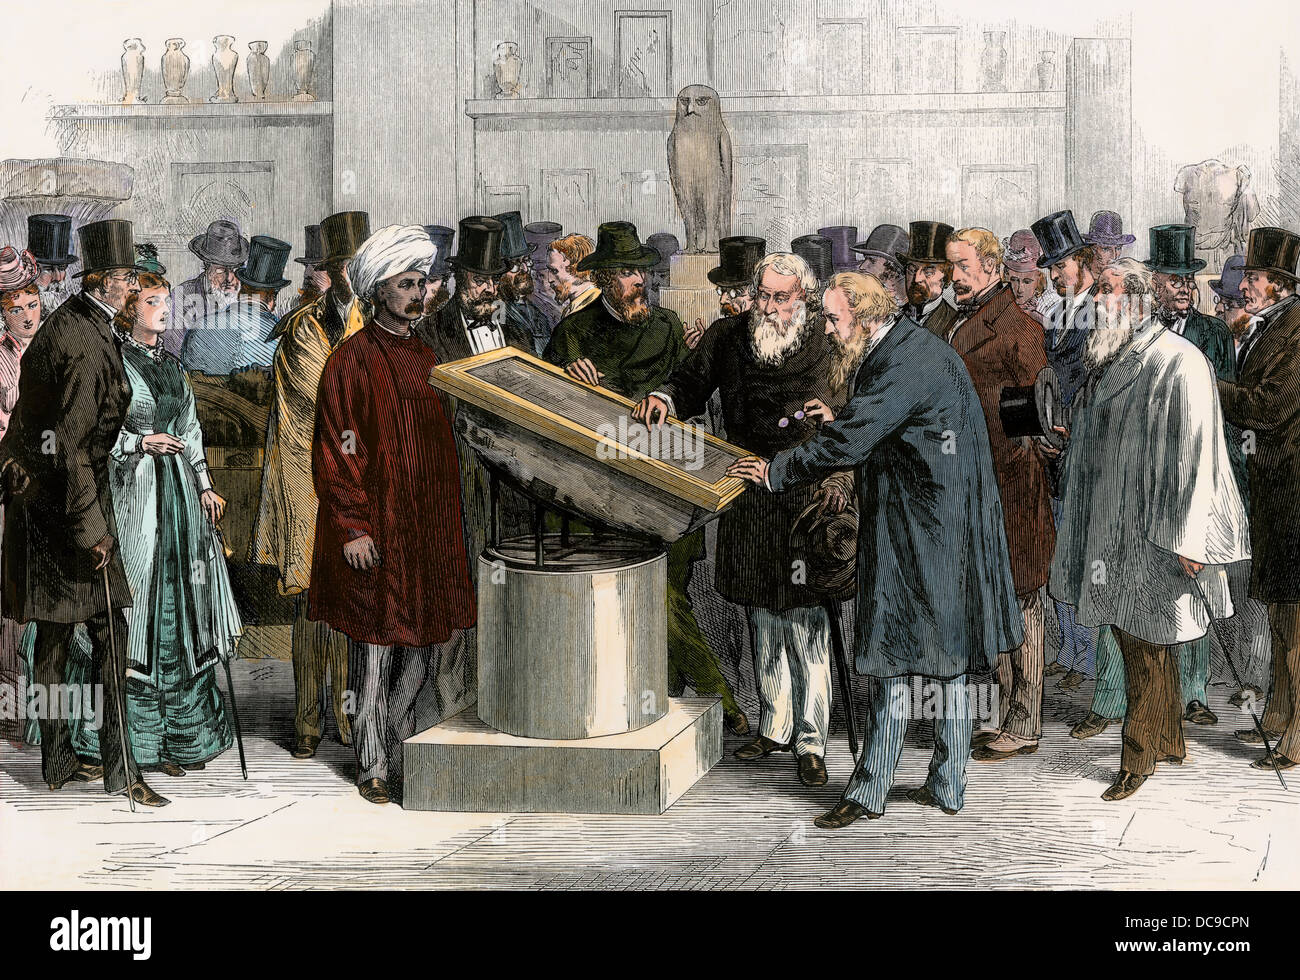 Crowds examining the Rosetta Stone exhibited at the British Museum, 1874. Hand-colored woodcut Stock Photo